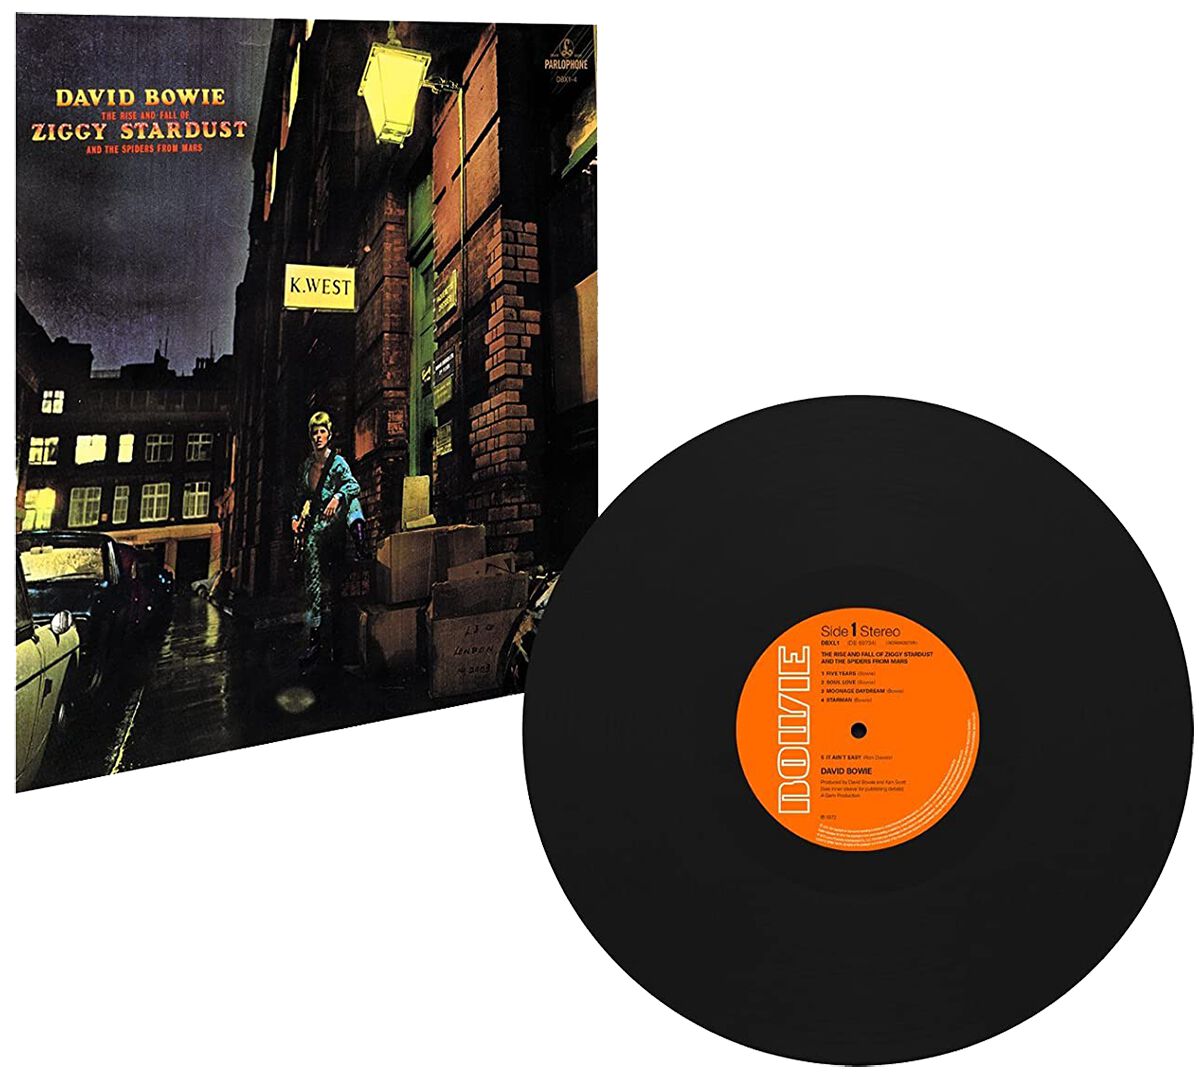 The rise and fall of Ziggy Stardust and the spiders from Mars von David Bowie - LP (Remastered, Re-Release, Standard)